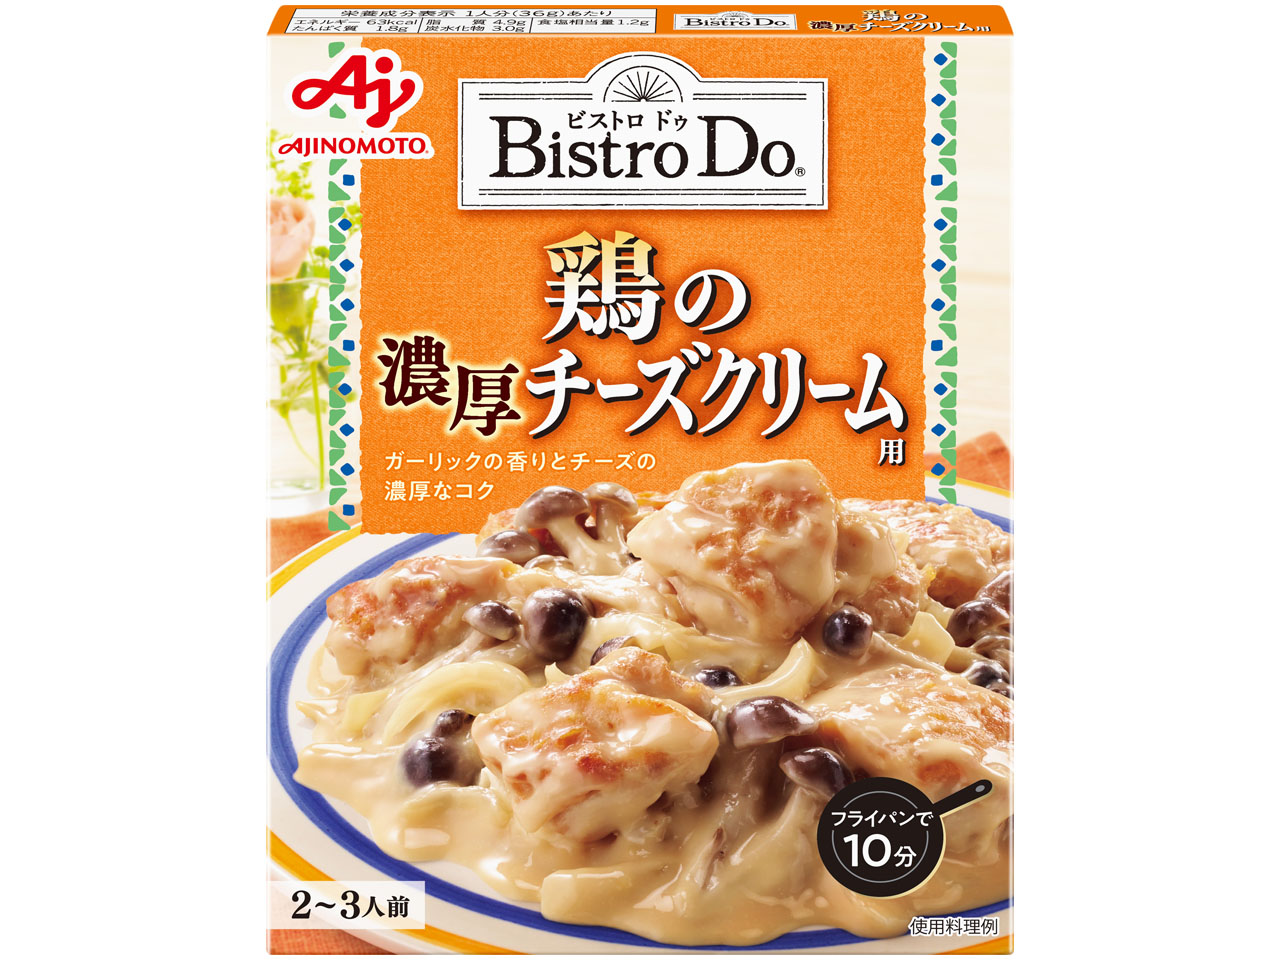 「Bistro Do」鶏の濃厚チーズクリーム用